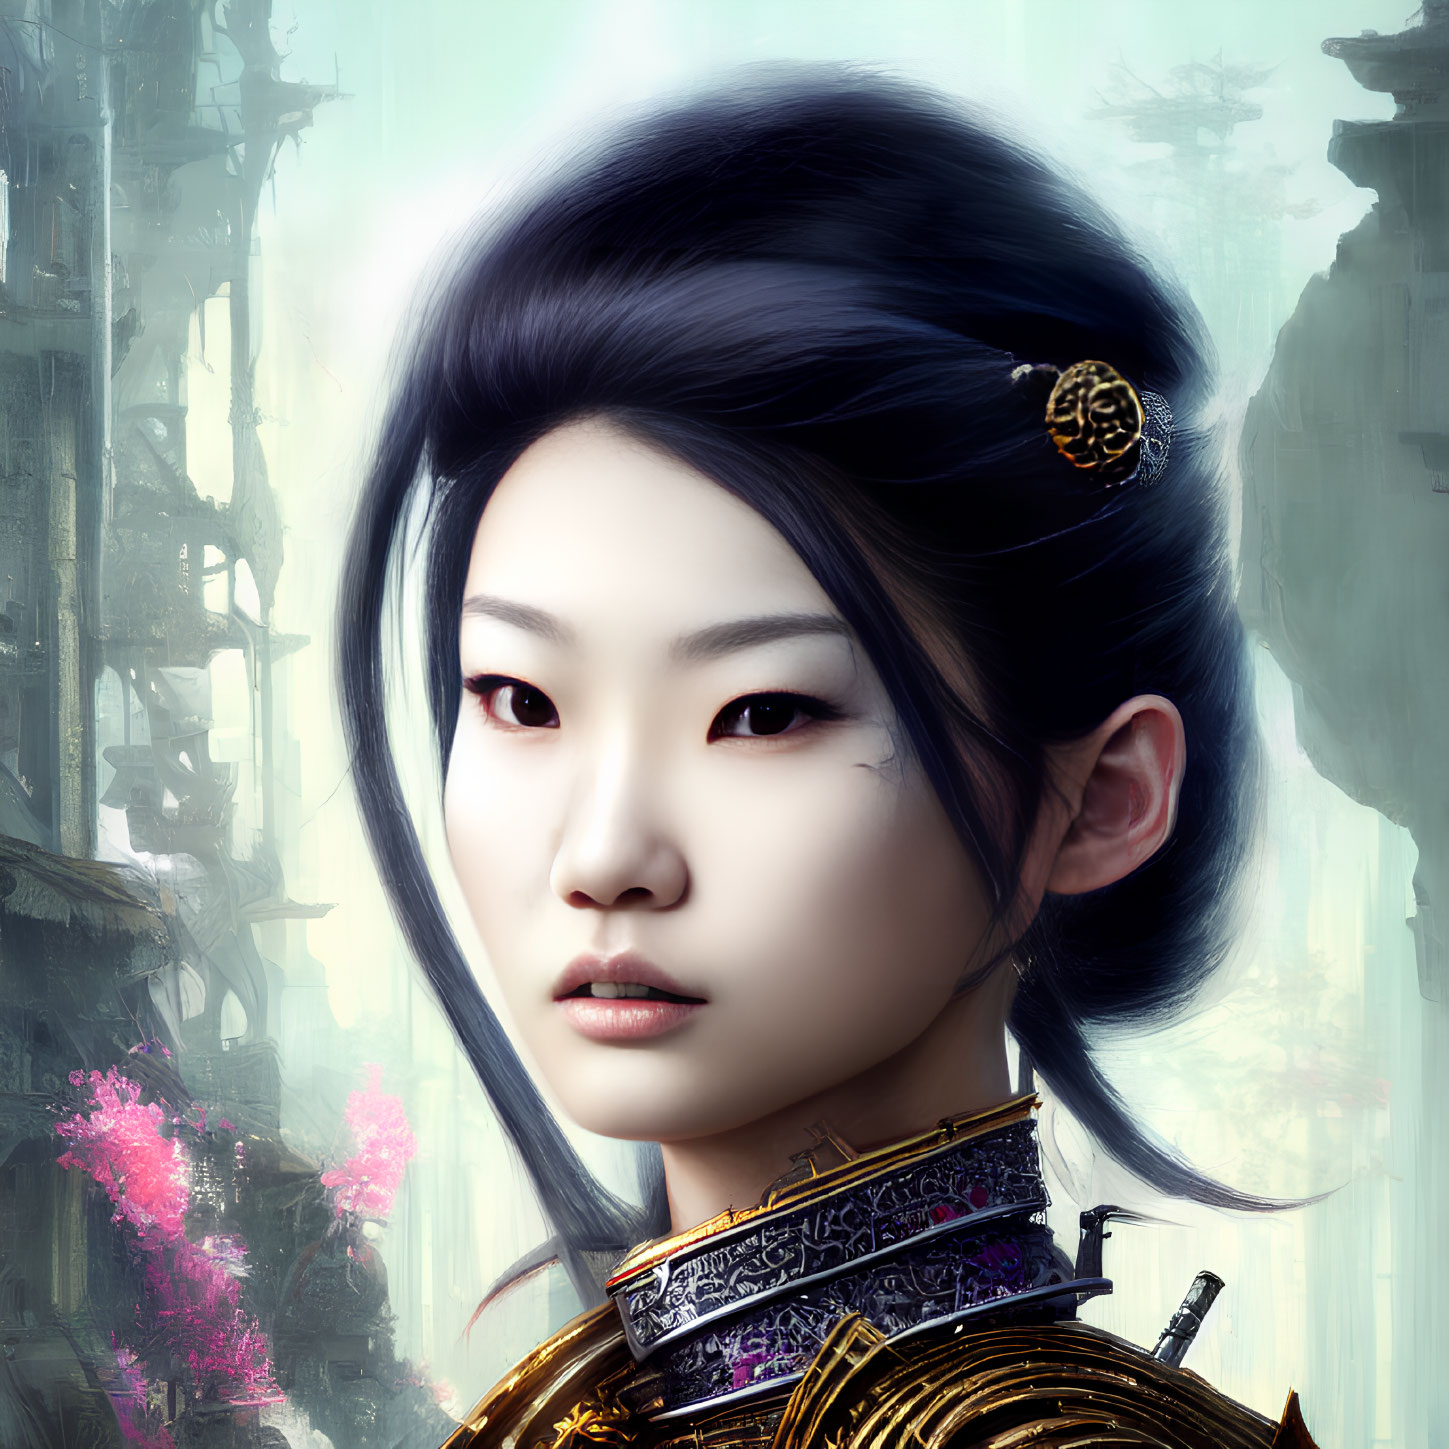 Digital portrait of Asian woman in traditional attire with ornate hairstyle on misty backdrop